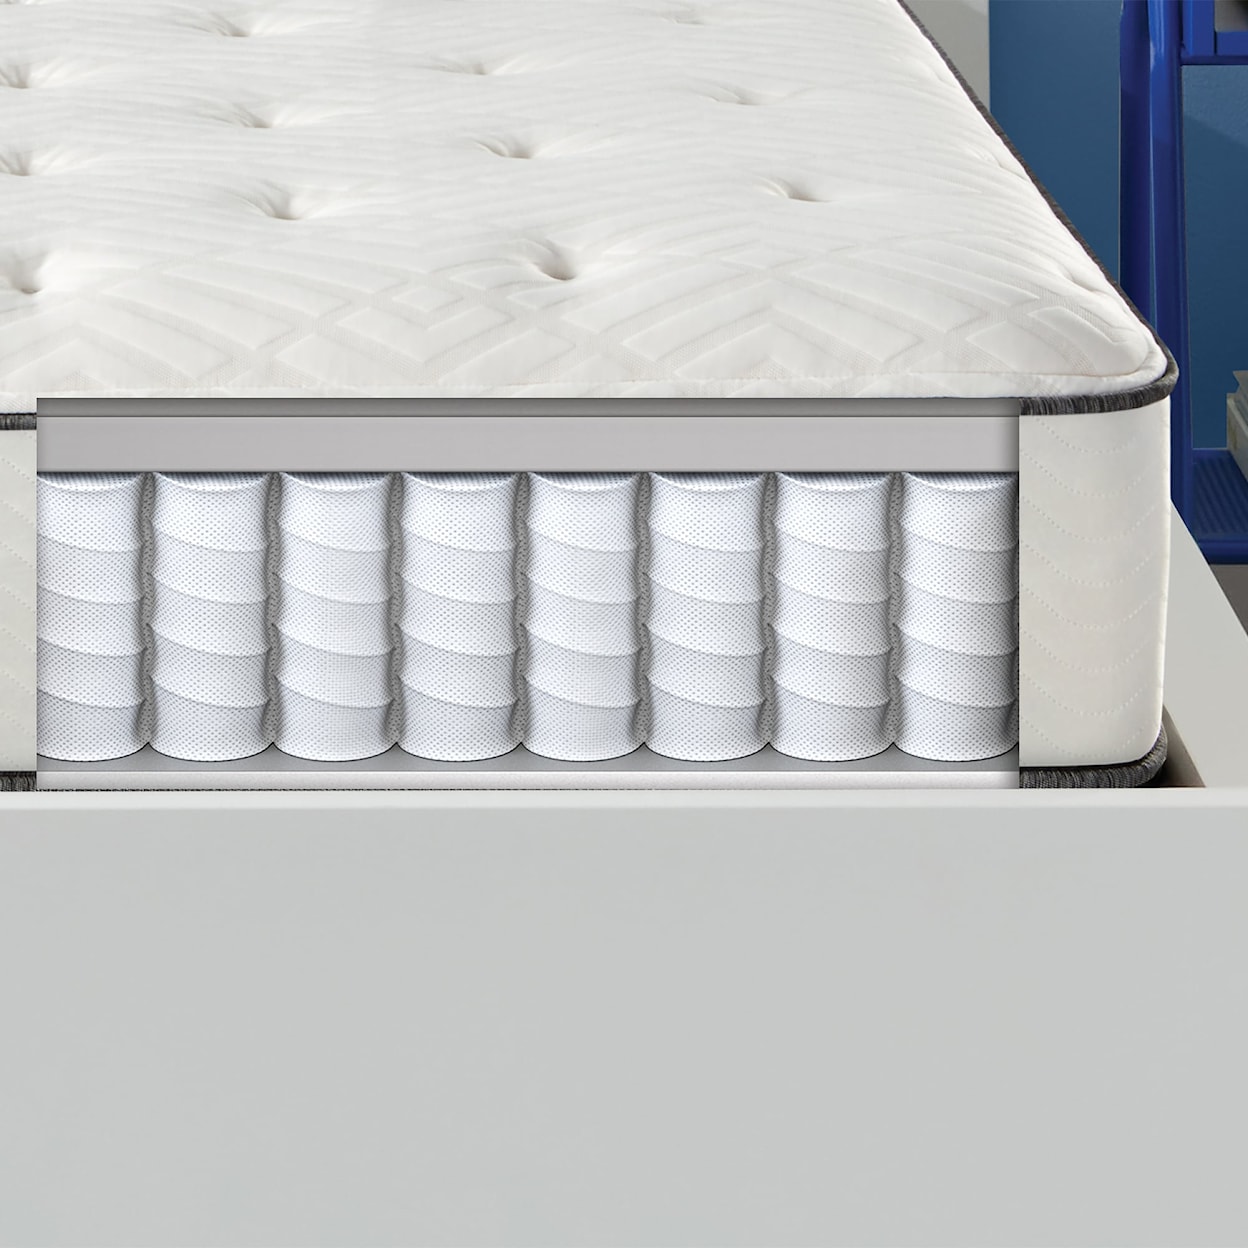 Simmons Holiday 11" Firm Full Mattress